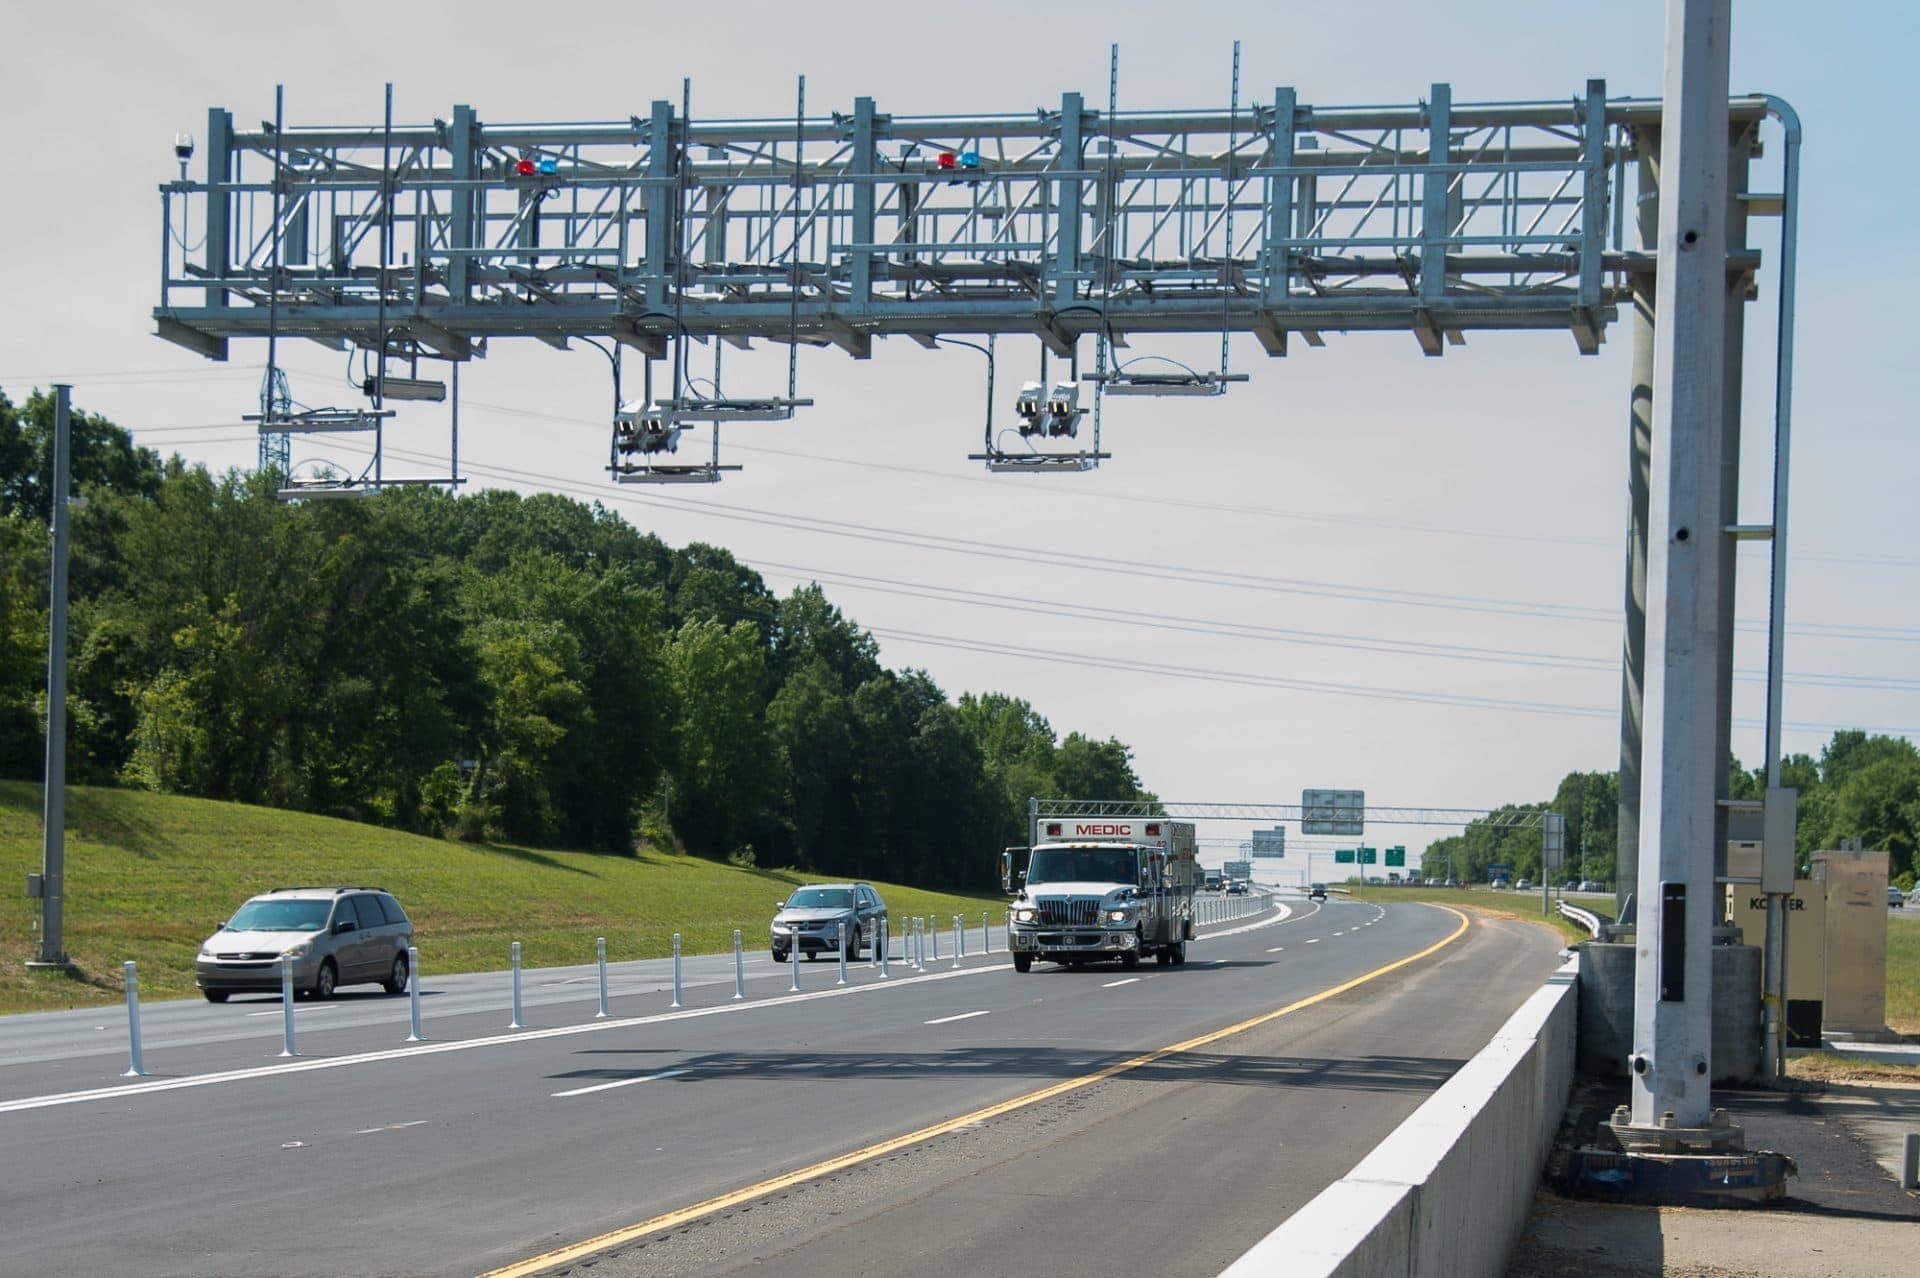 Northern section of the I-77 Express lanes project, from Hambright Road to Exit 36 in Mooresville